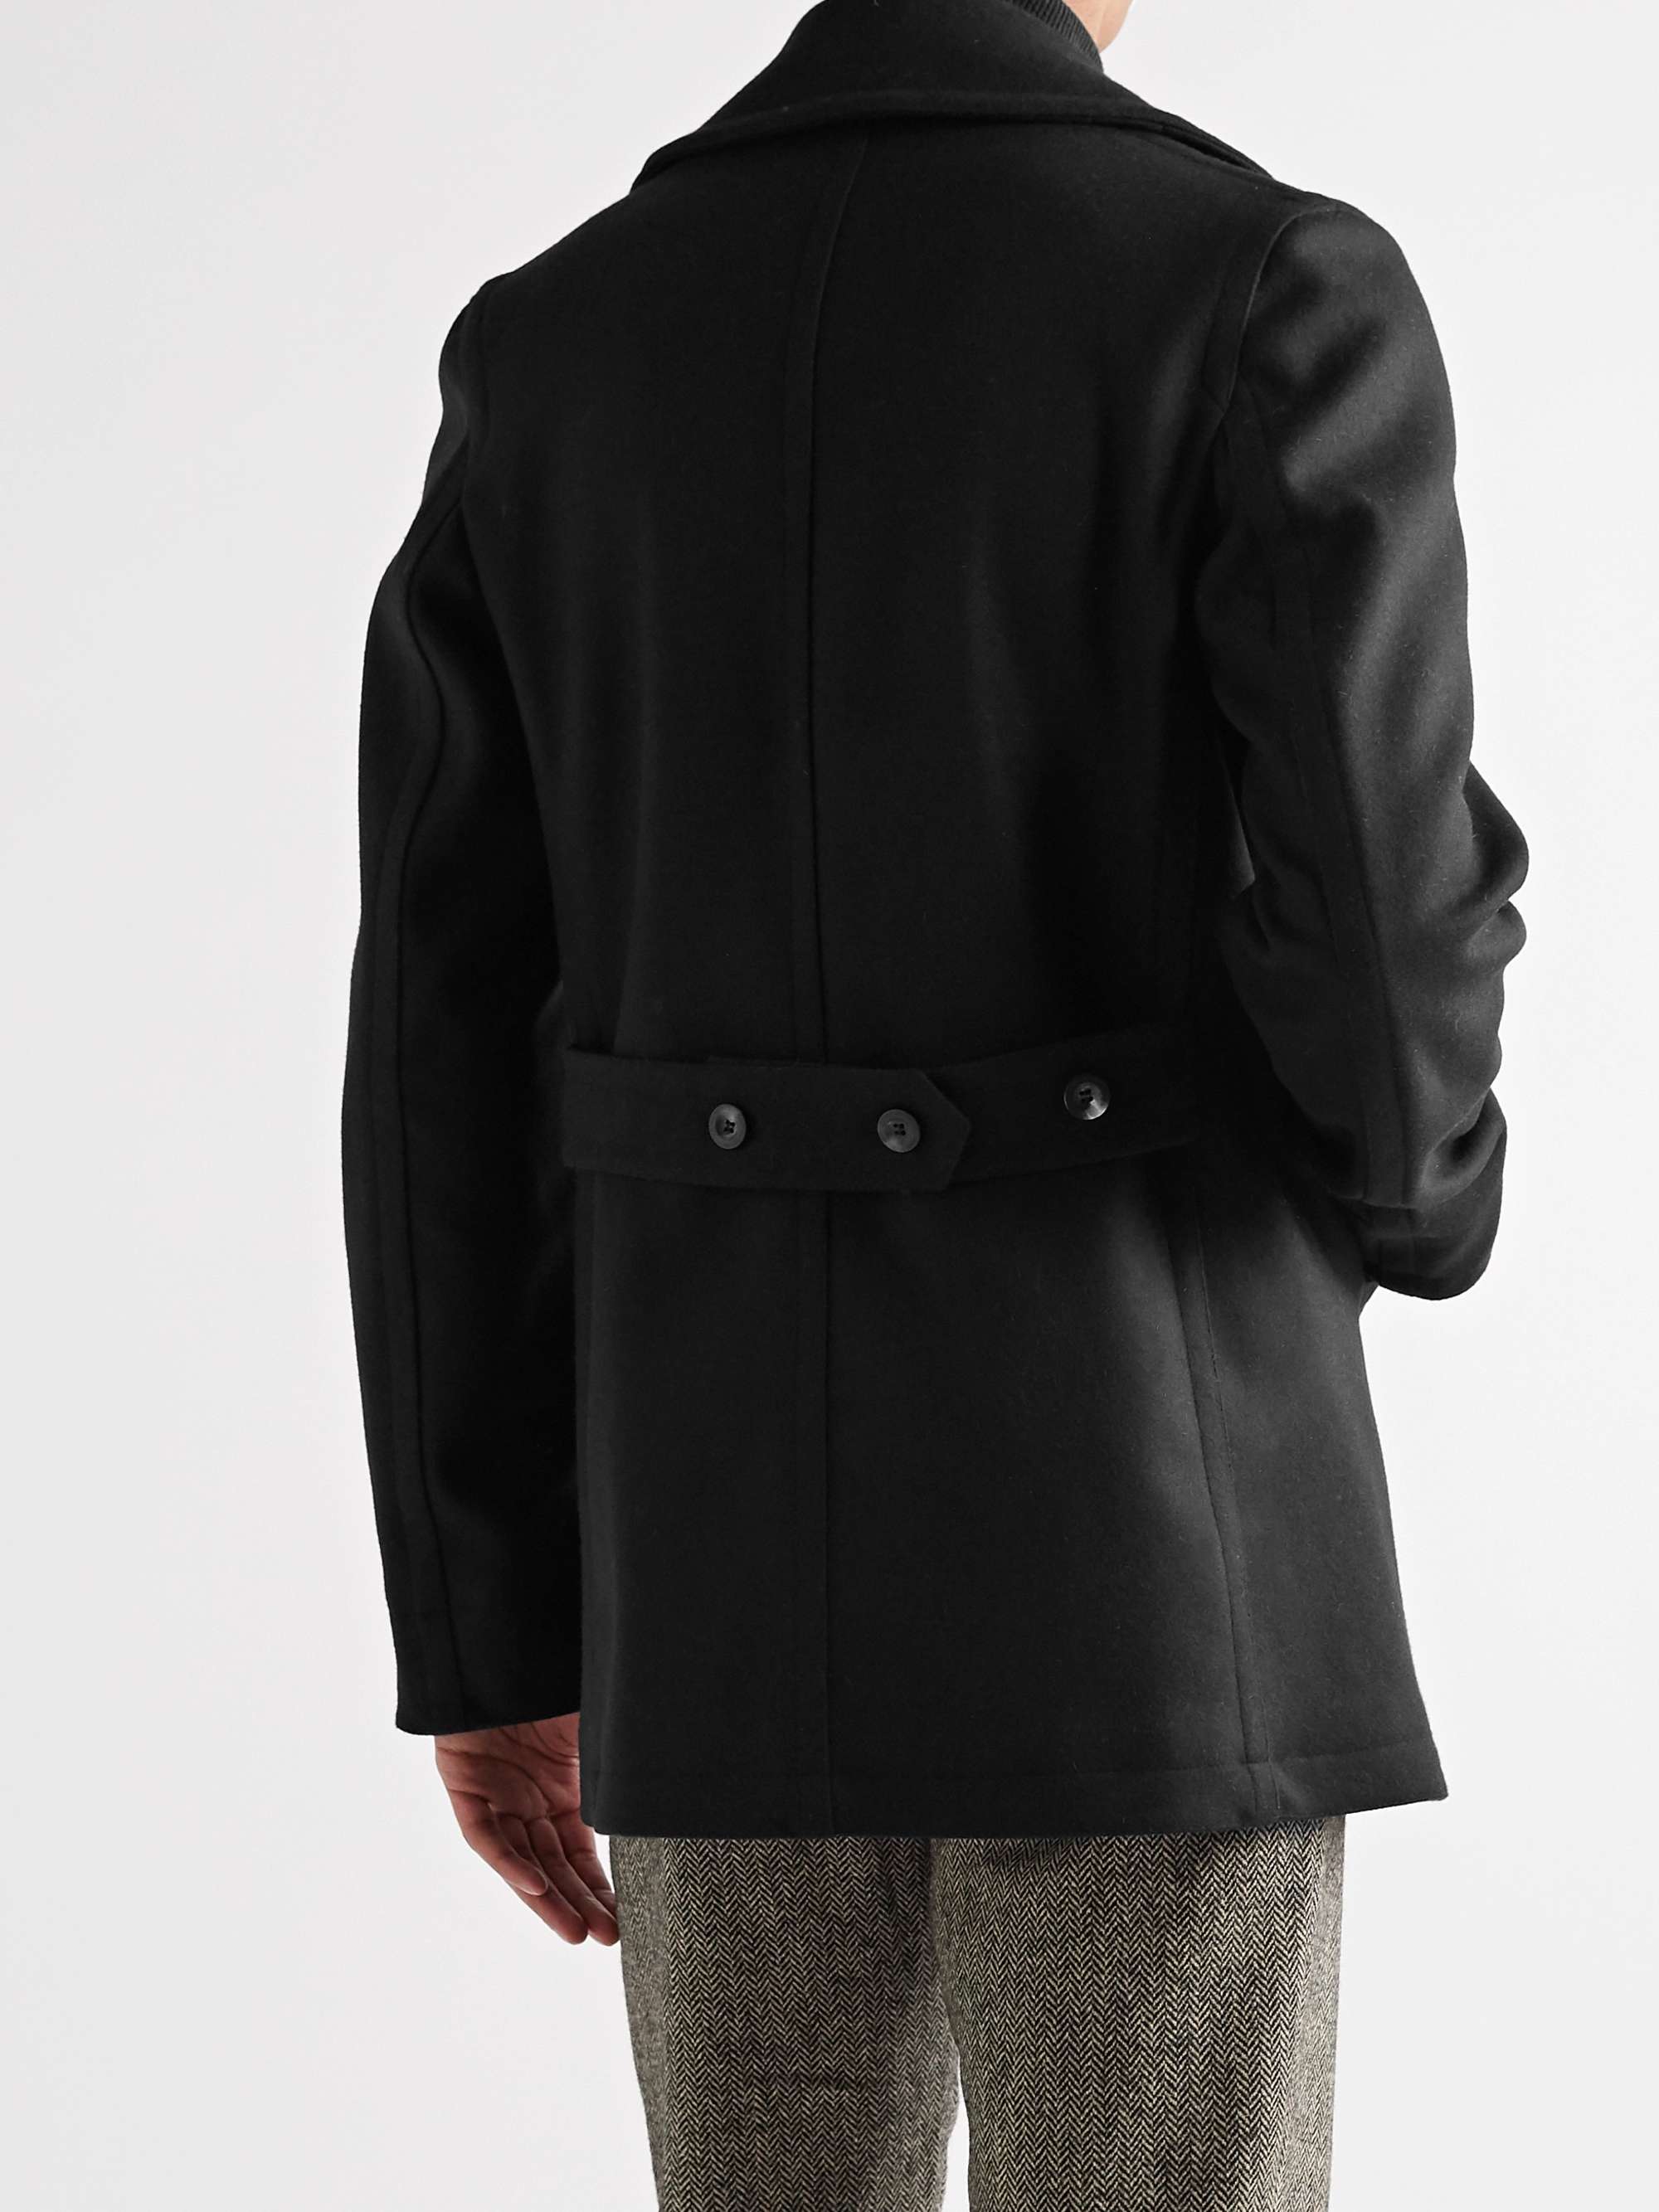 PRIVATE WHITE V.C. Double-Breasted Melton Wool Peacoat